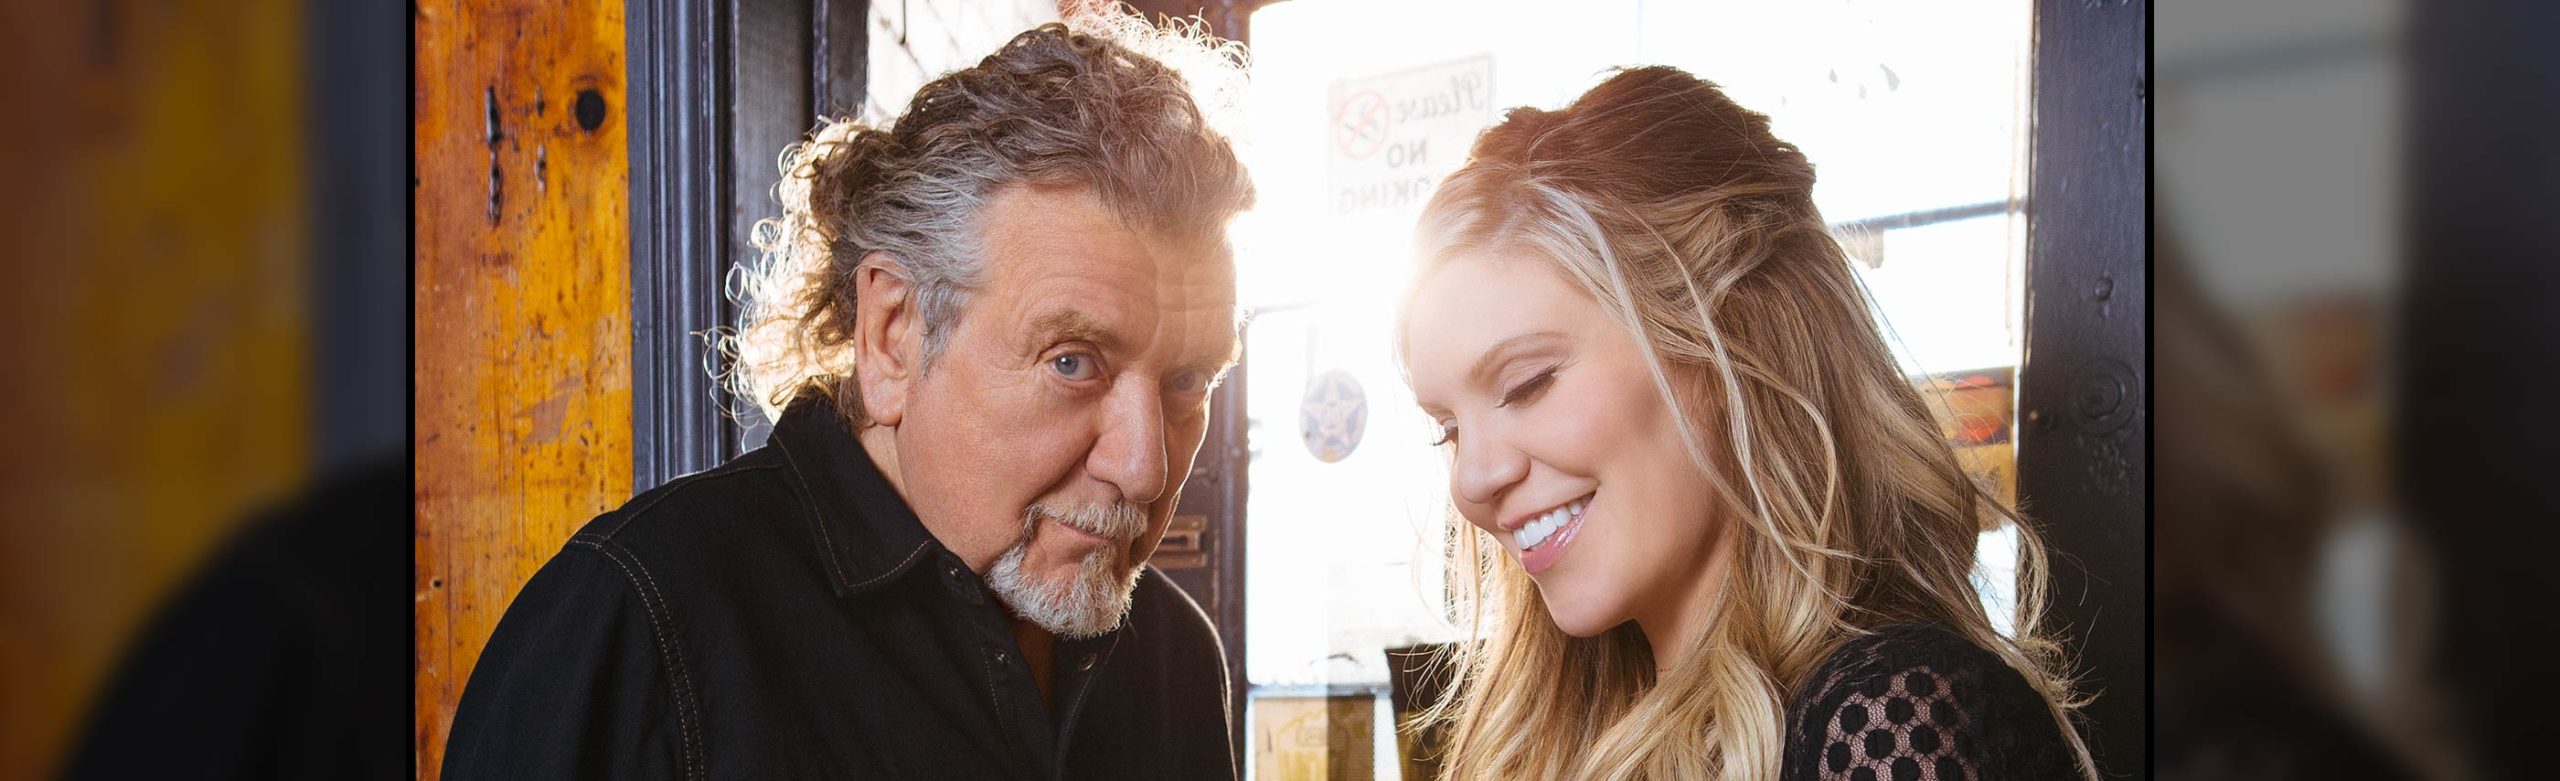 Robert Plant and Alison Krauss Announce Raising the Roof Tour at KettleHouse Amphitheater Image